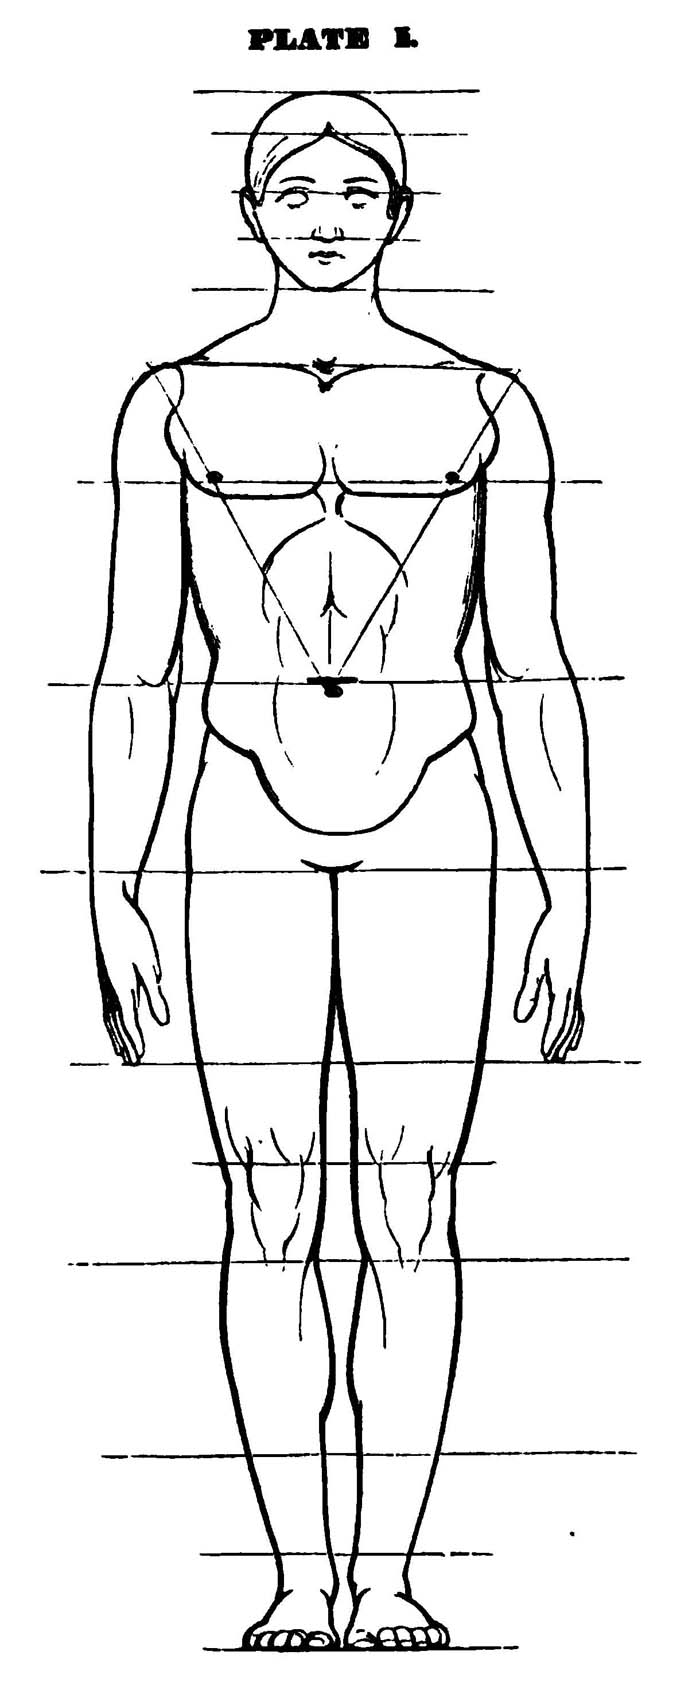 Explained Human Figure Drawings And Sketches (Male And Female Both